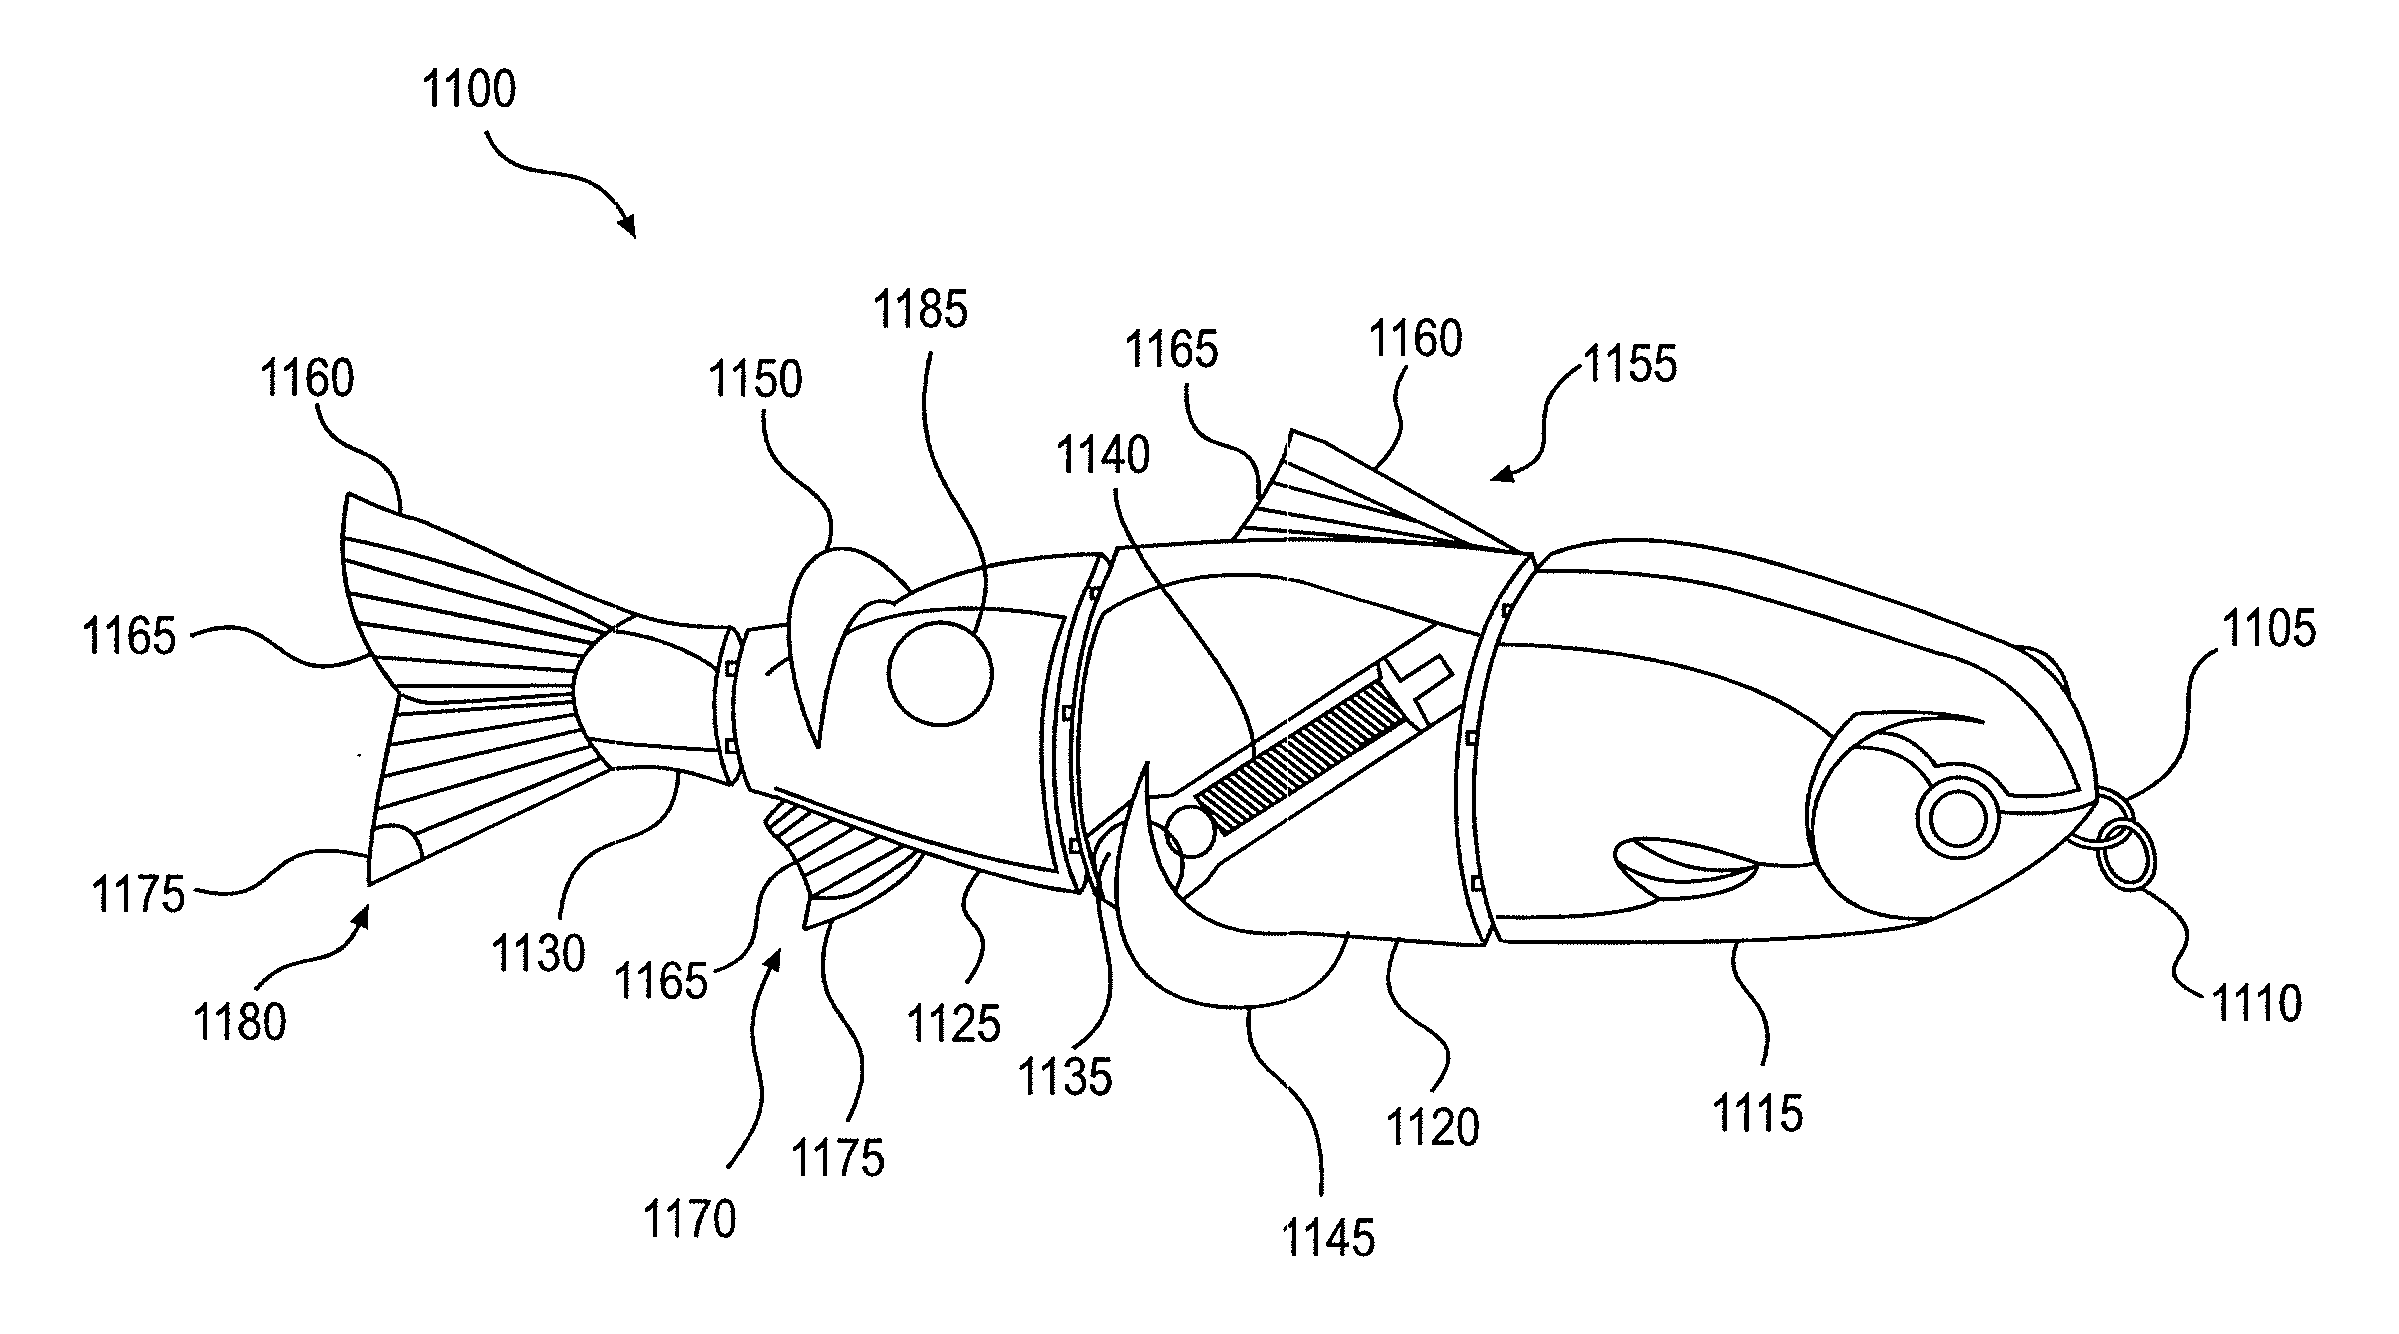 Fishing lure with mechanically-actuated lower frequency tone generation device